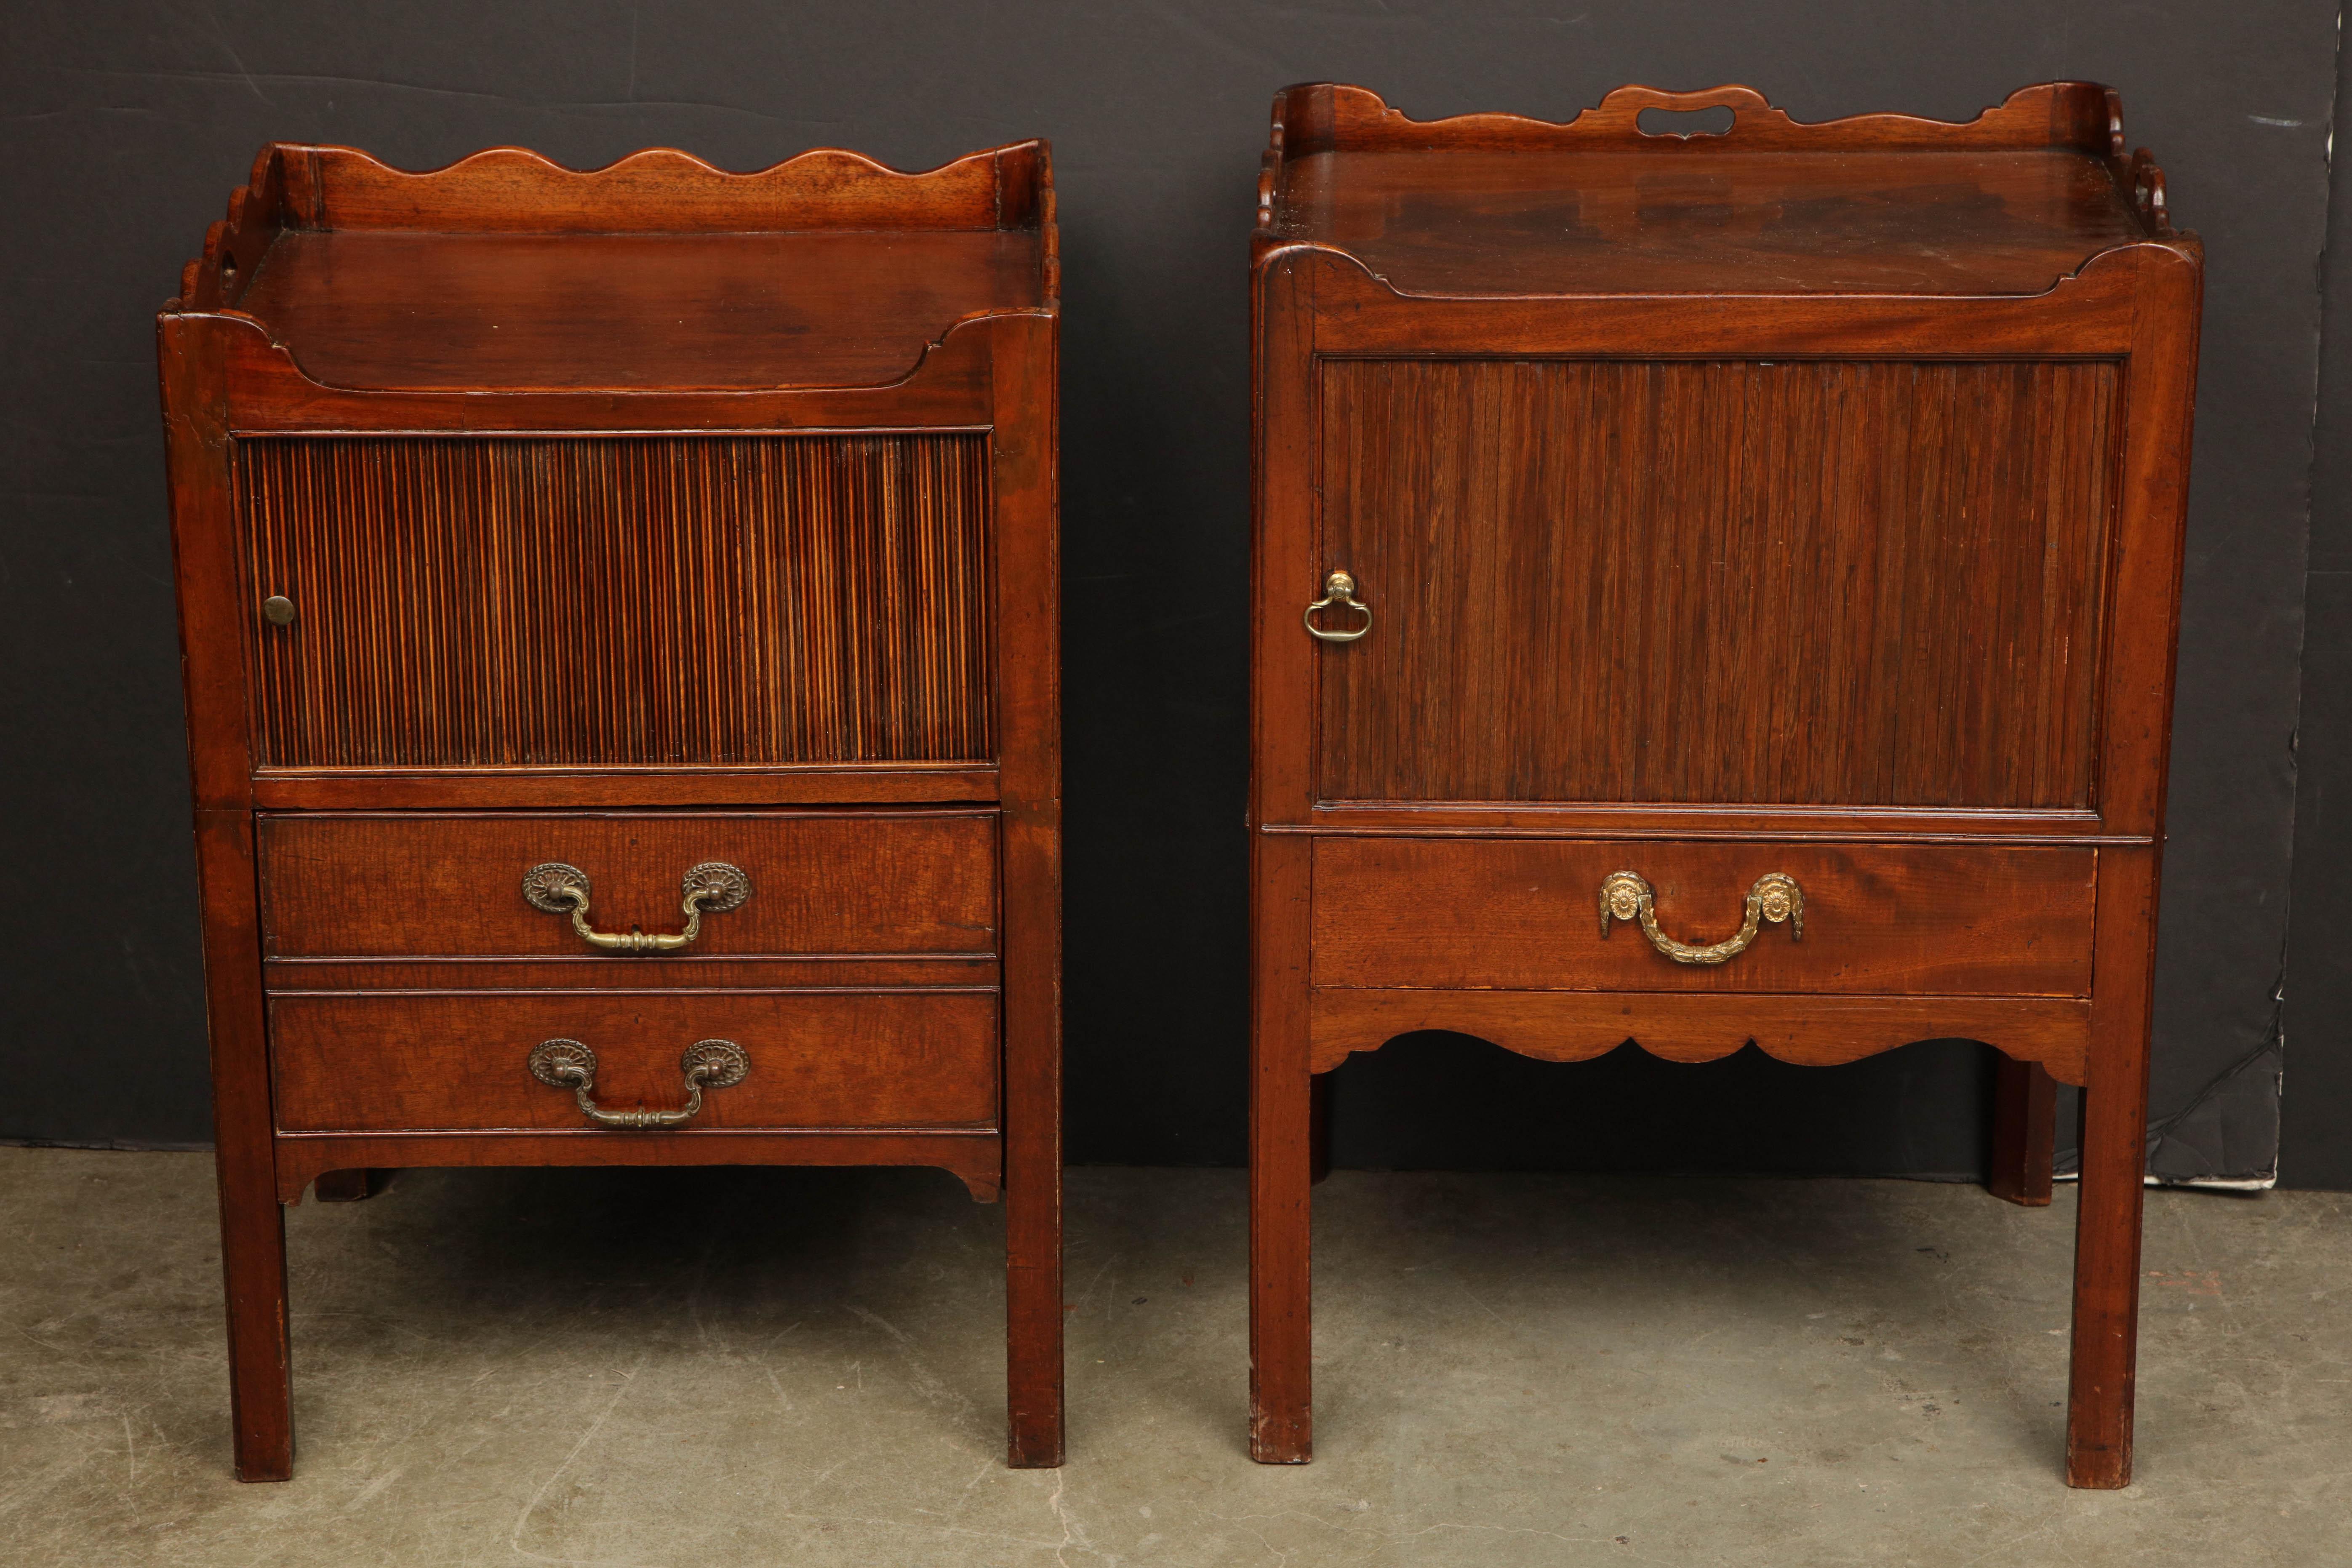 Near pair of English George III mahogany bedside commodes with open handles galleries and tambour cupboards.